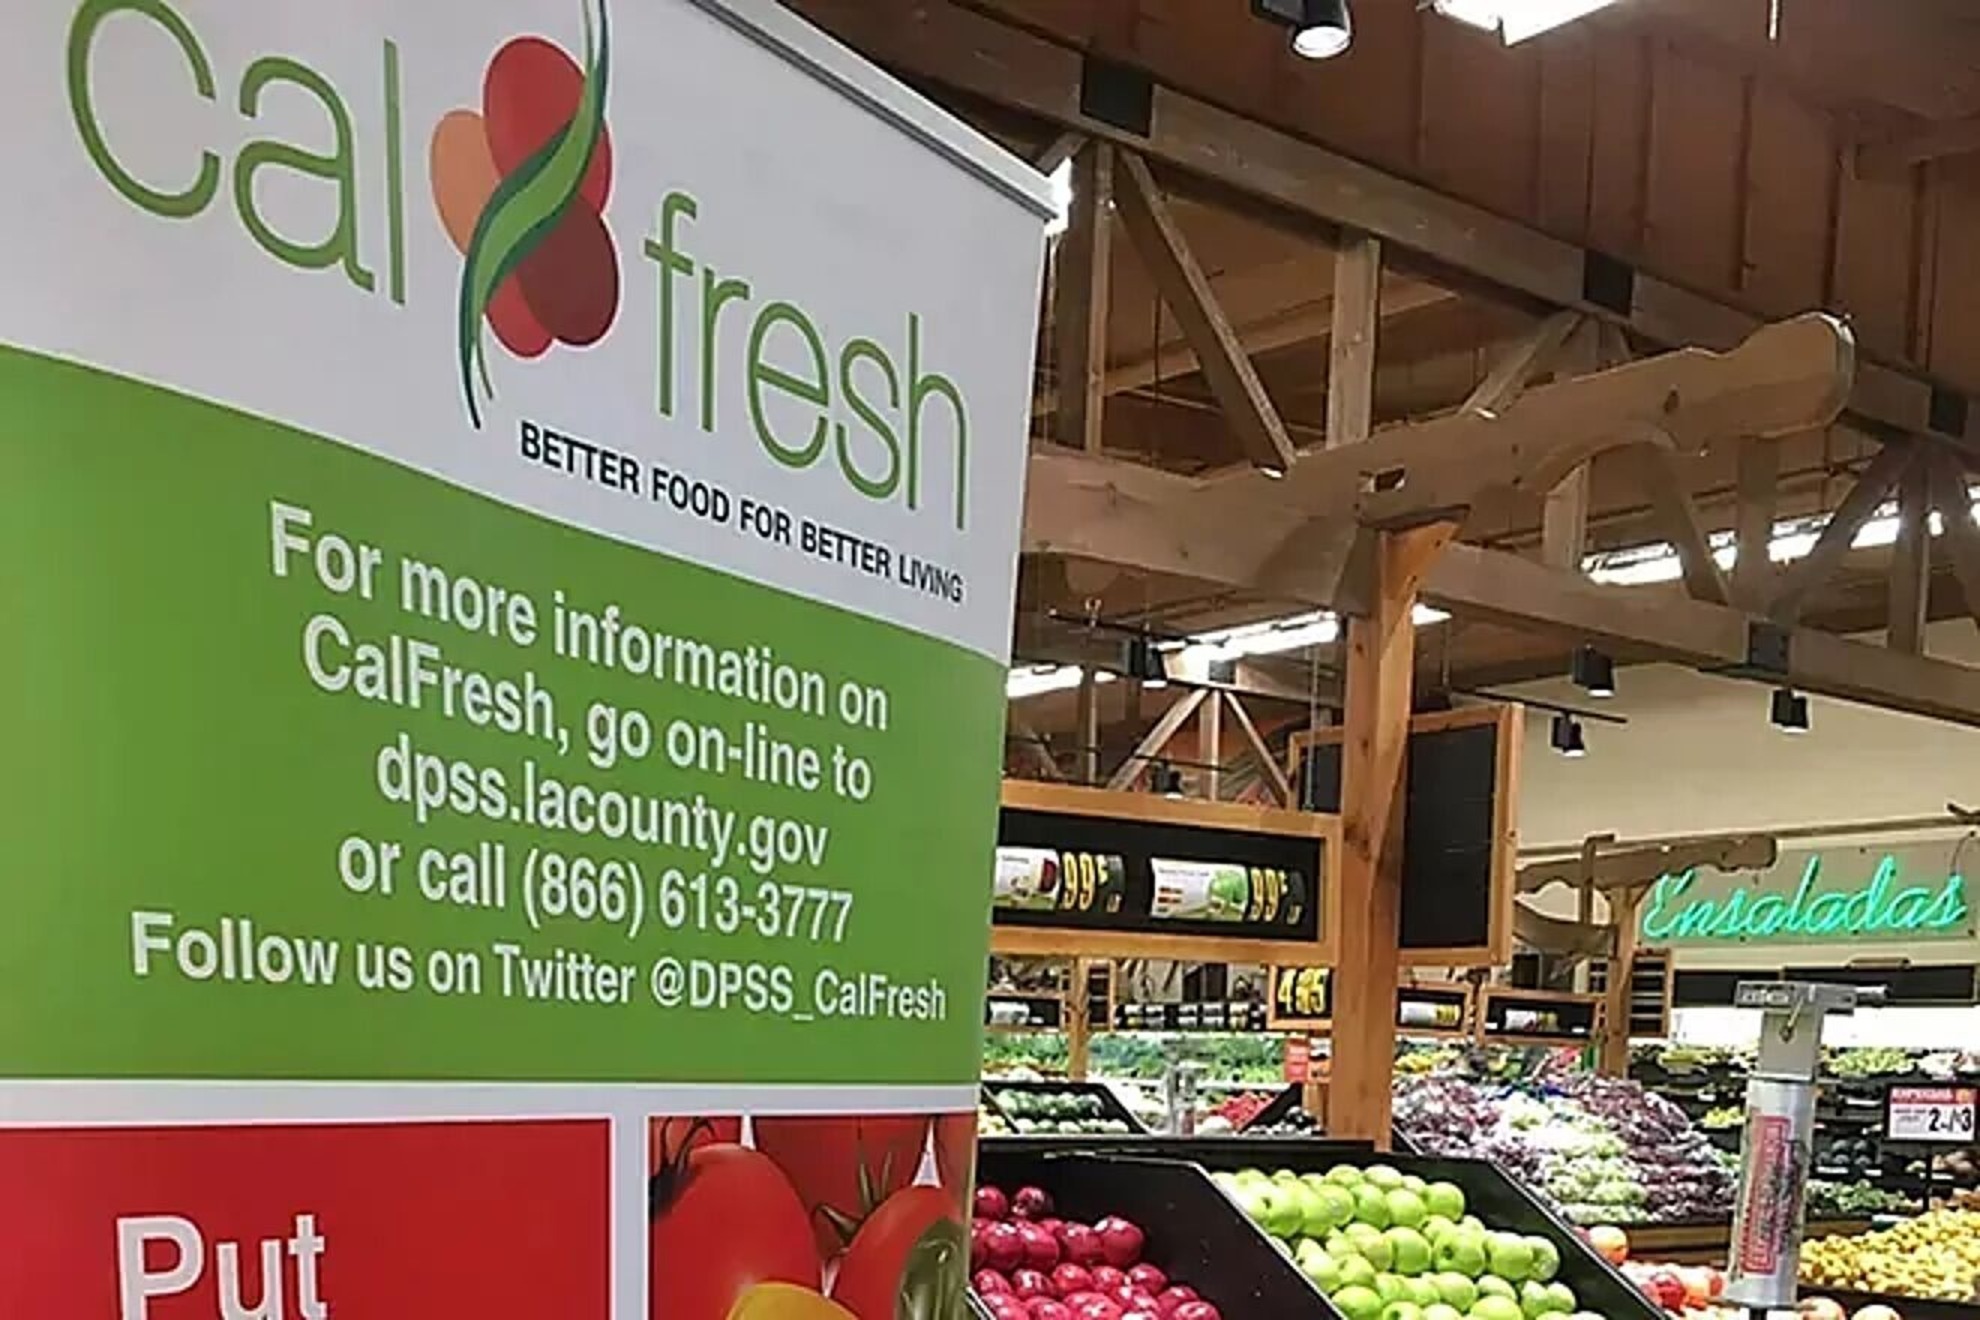 CalFresh December Payment: Who is eligible to get their December payment this week?